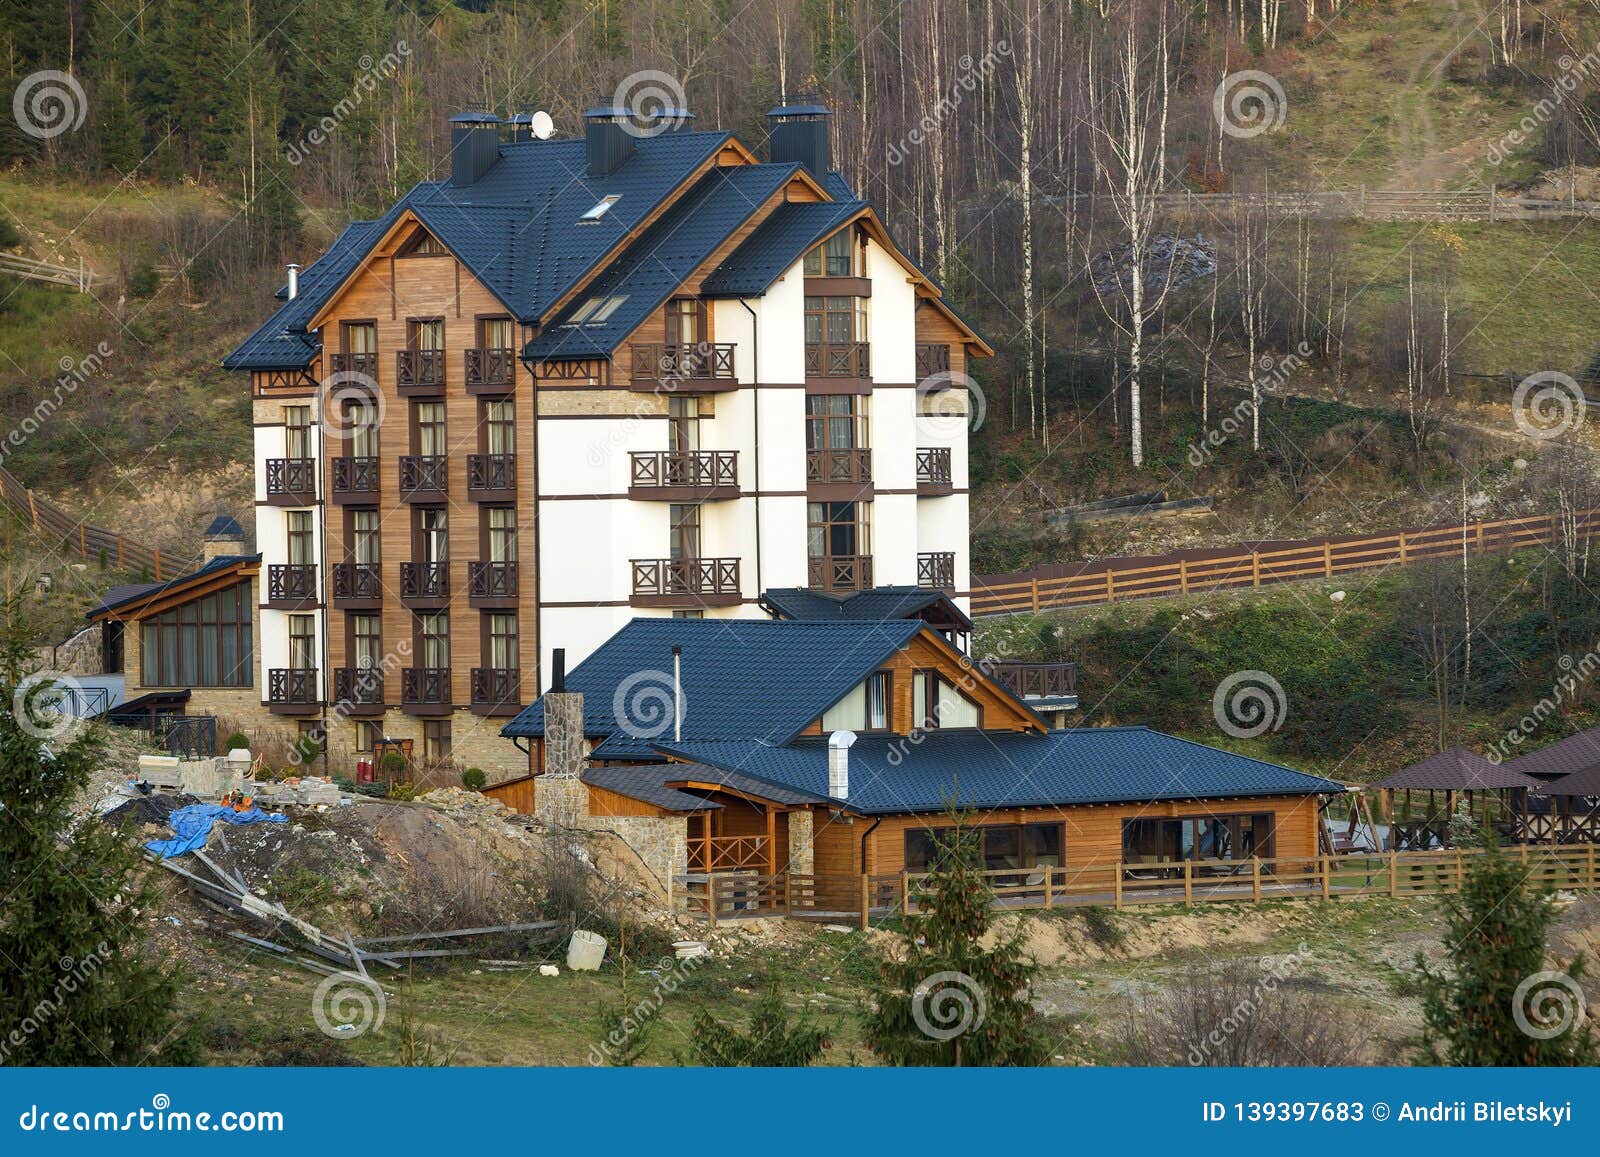 new modern comfortable four-story hotel building with attached premises, attic rooms and high chimneys in ecological rural area on